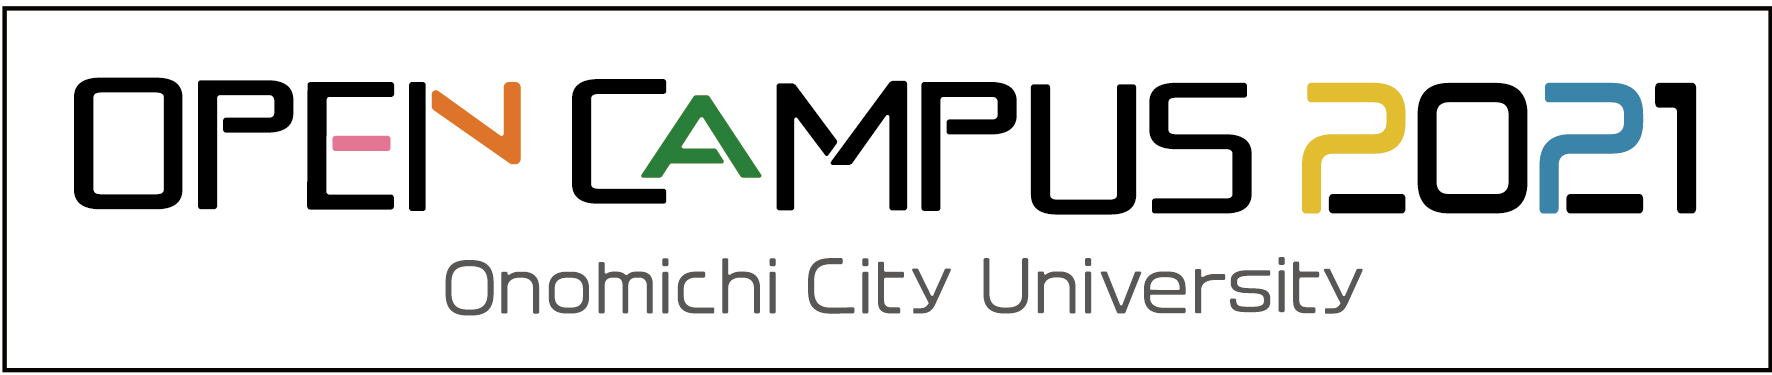 2021open campus logo-banner-2.png